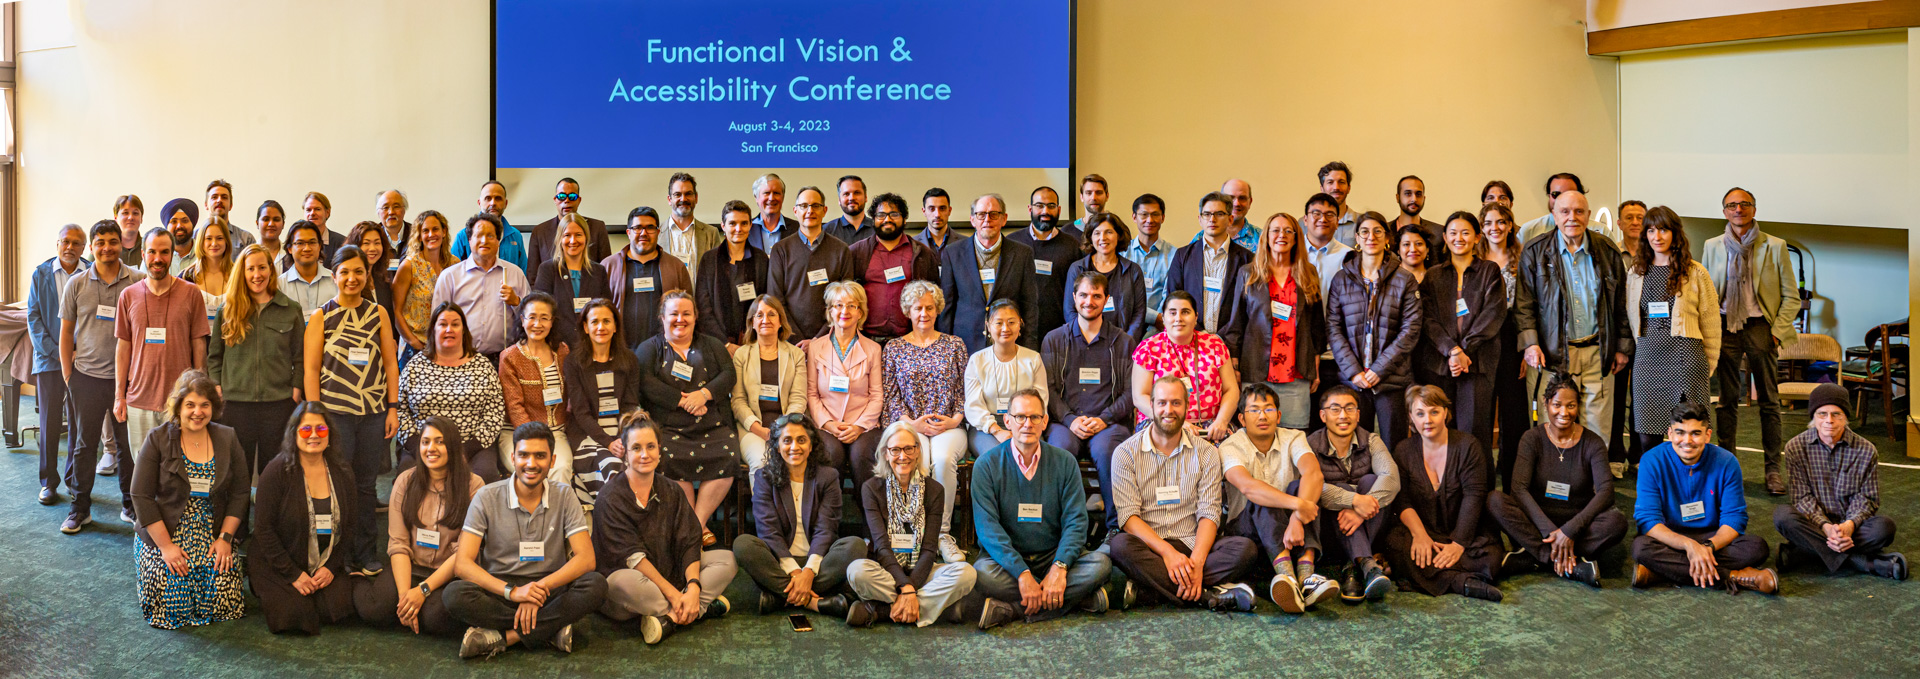 group photo of the FVA conference participants